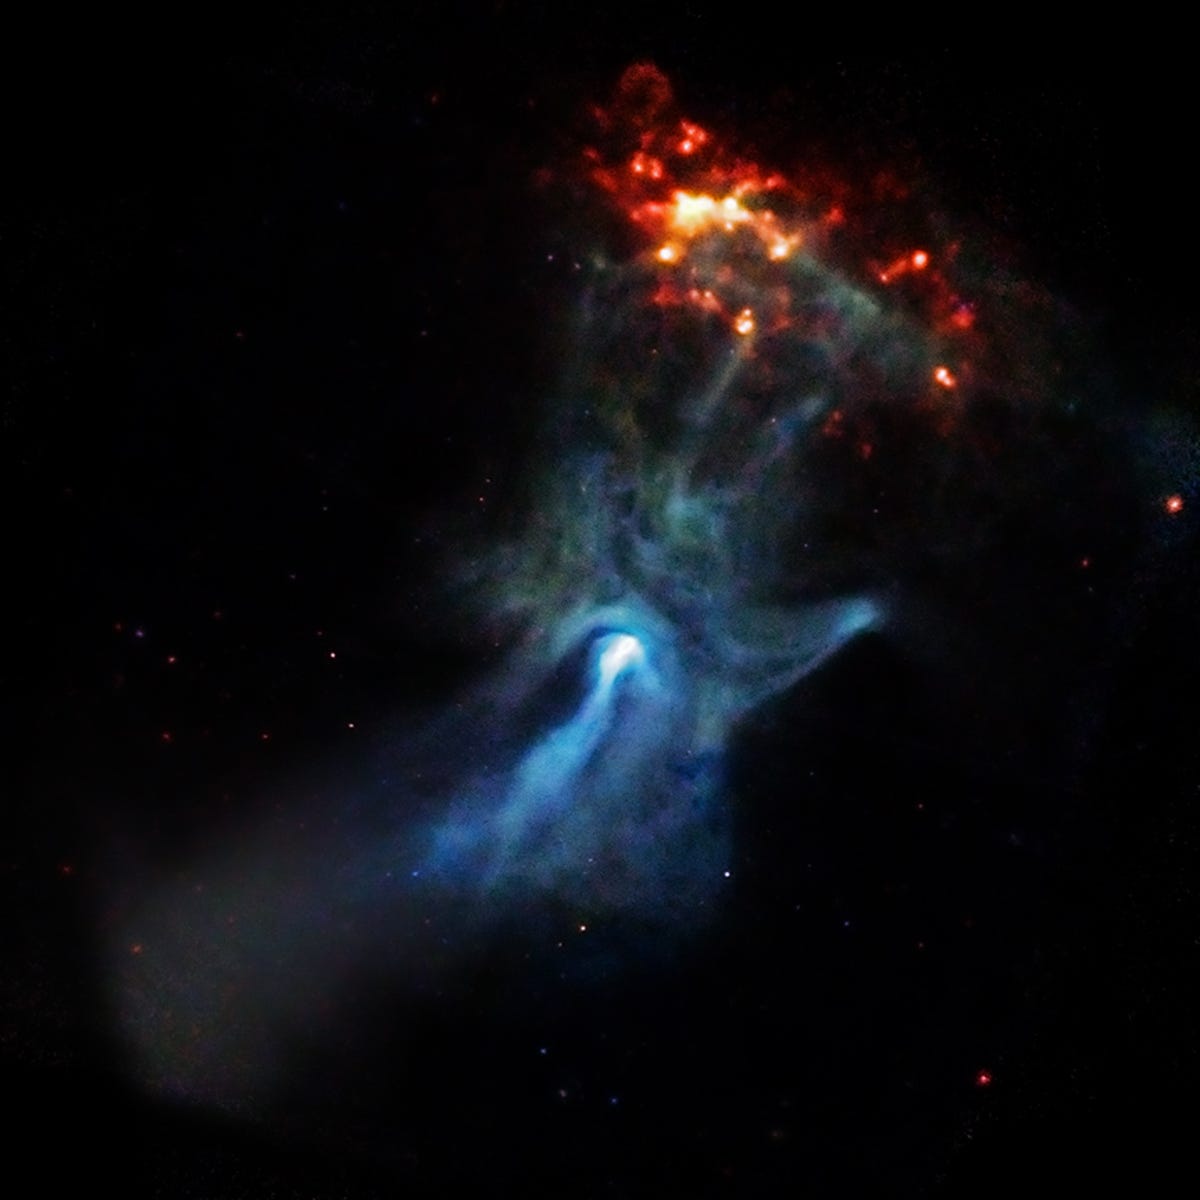 Ethereal view shows a blue hand-like shape reaching into a collection of orange and red light against a dark space background.